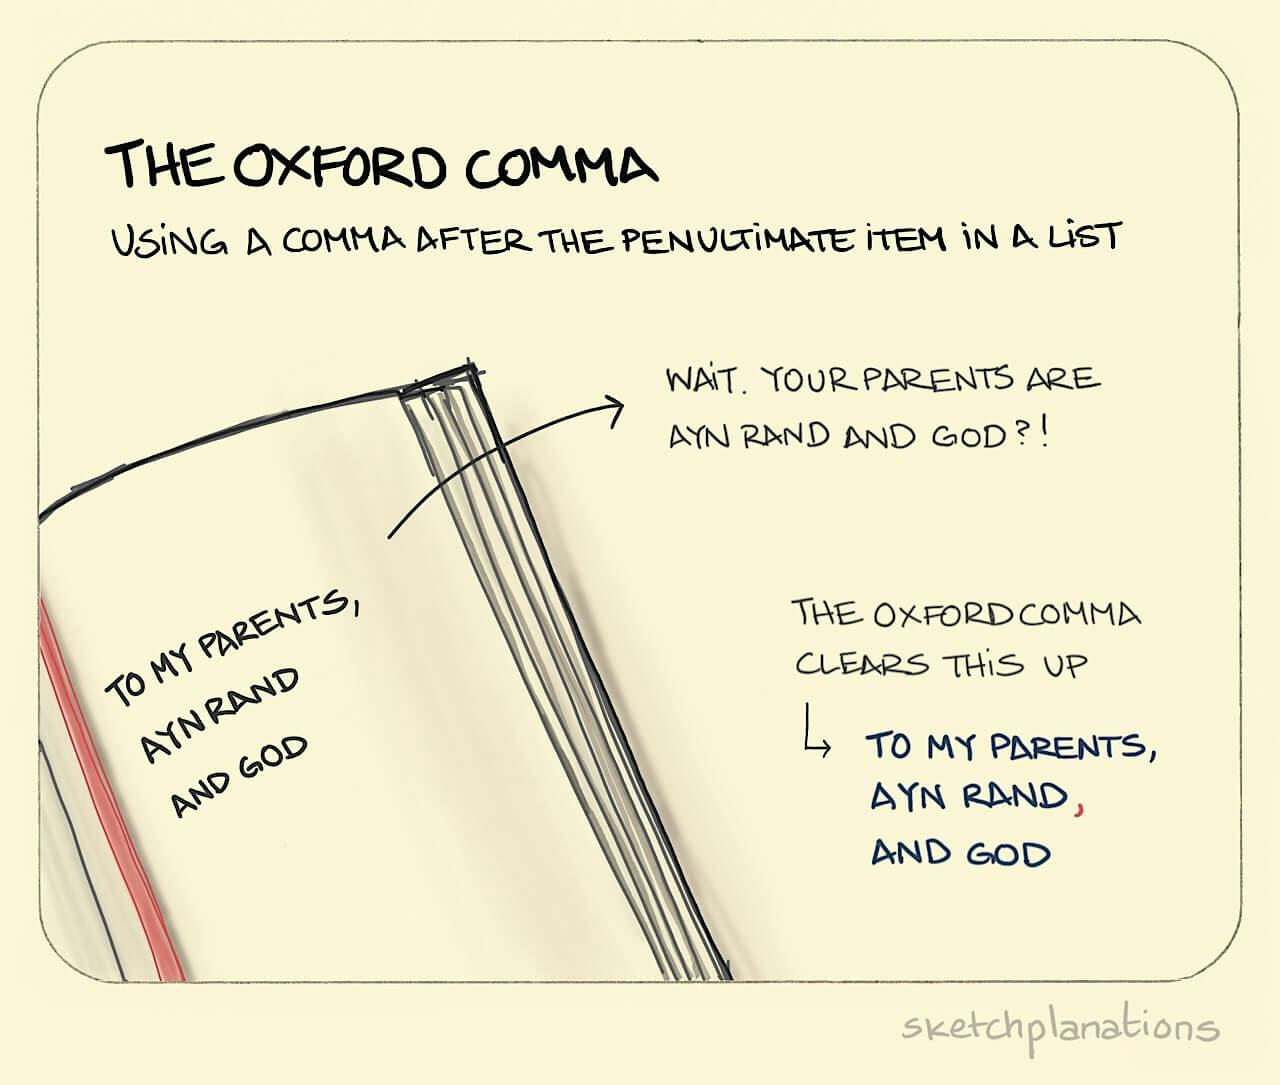 The Oxford comma - Sketchplanations